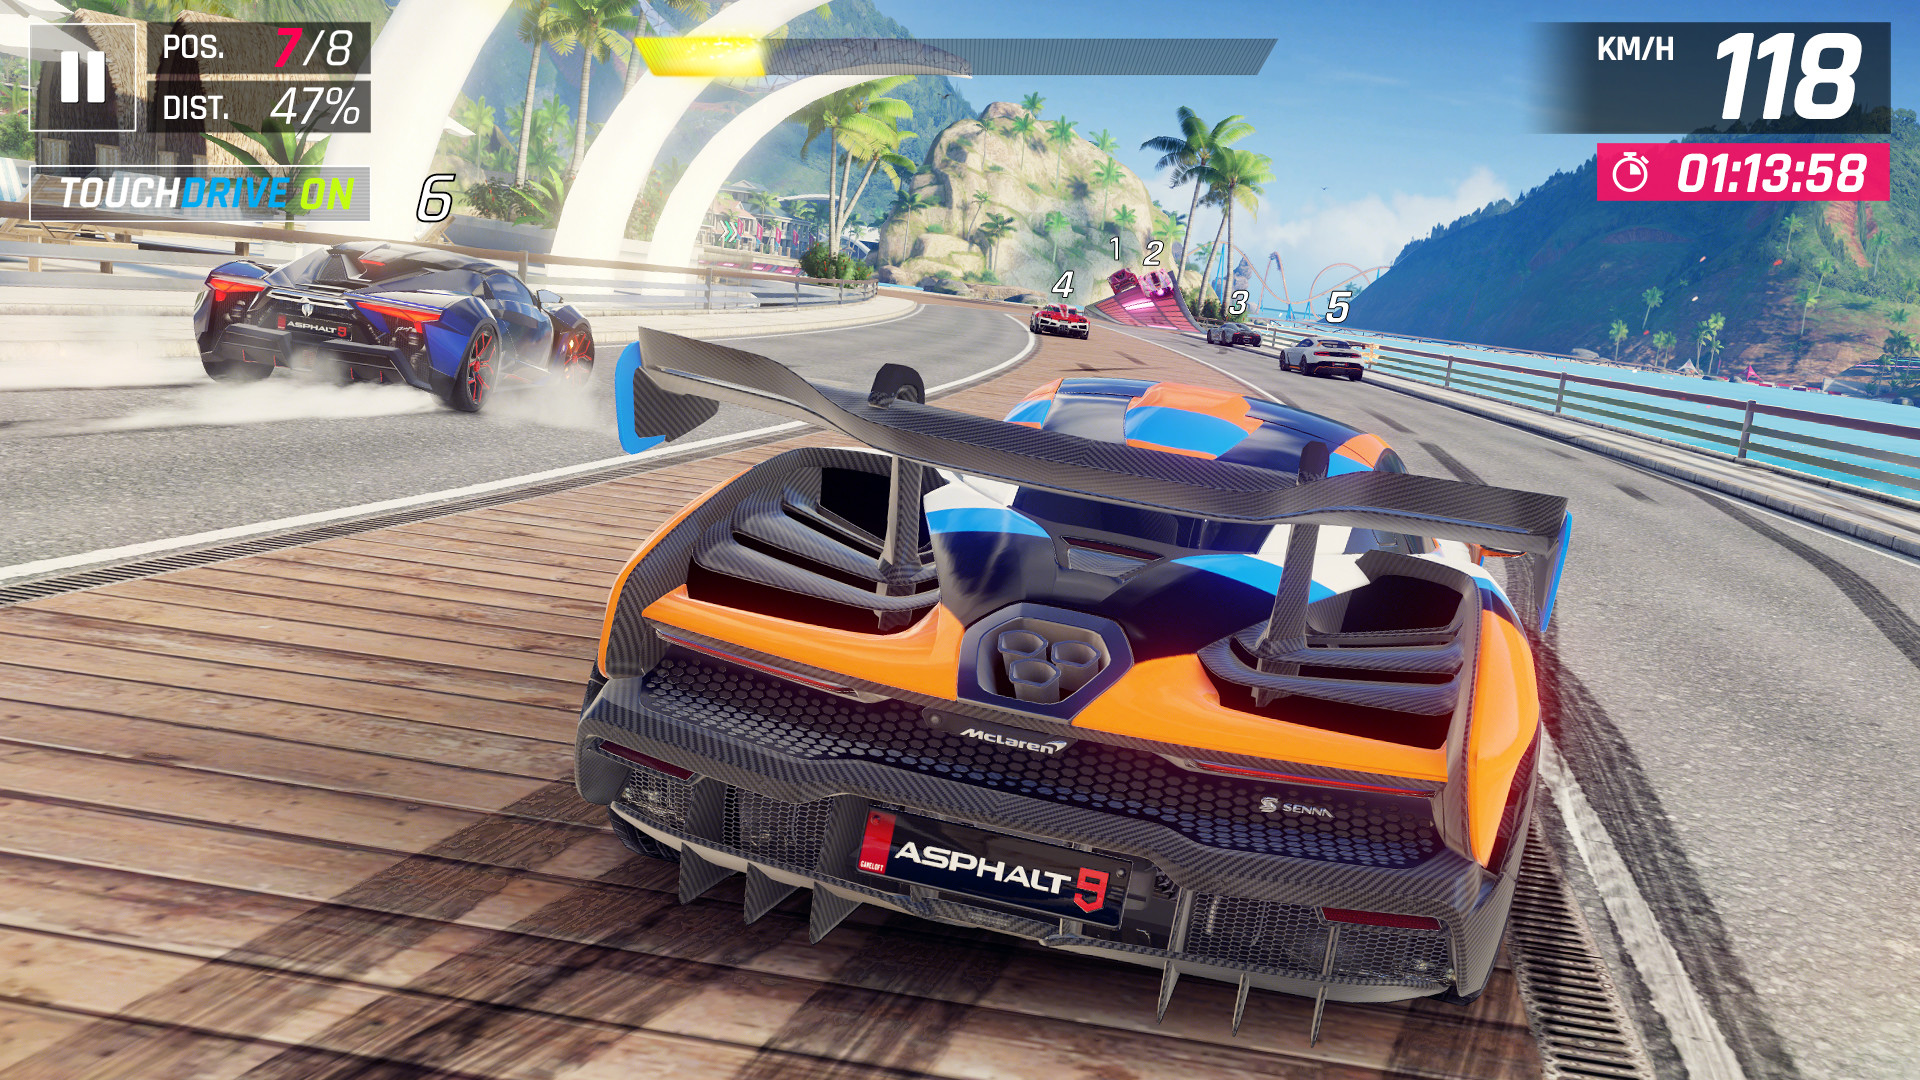 Asphalt 9: Legends Now Available for Free on Xbox One and Xbox